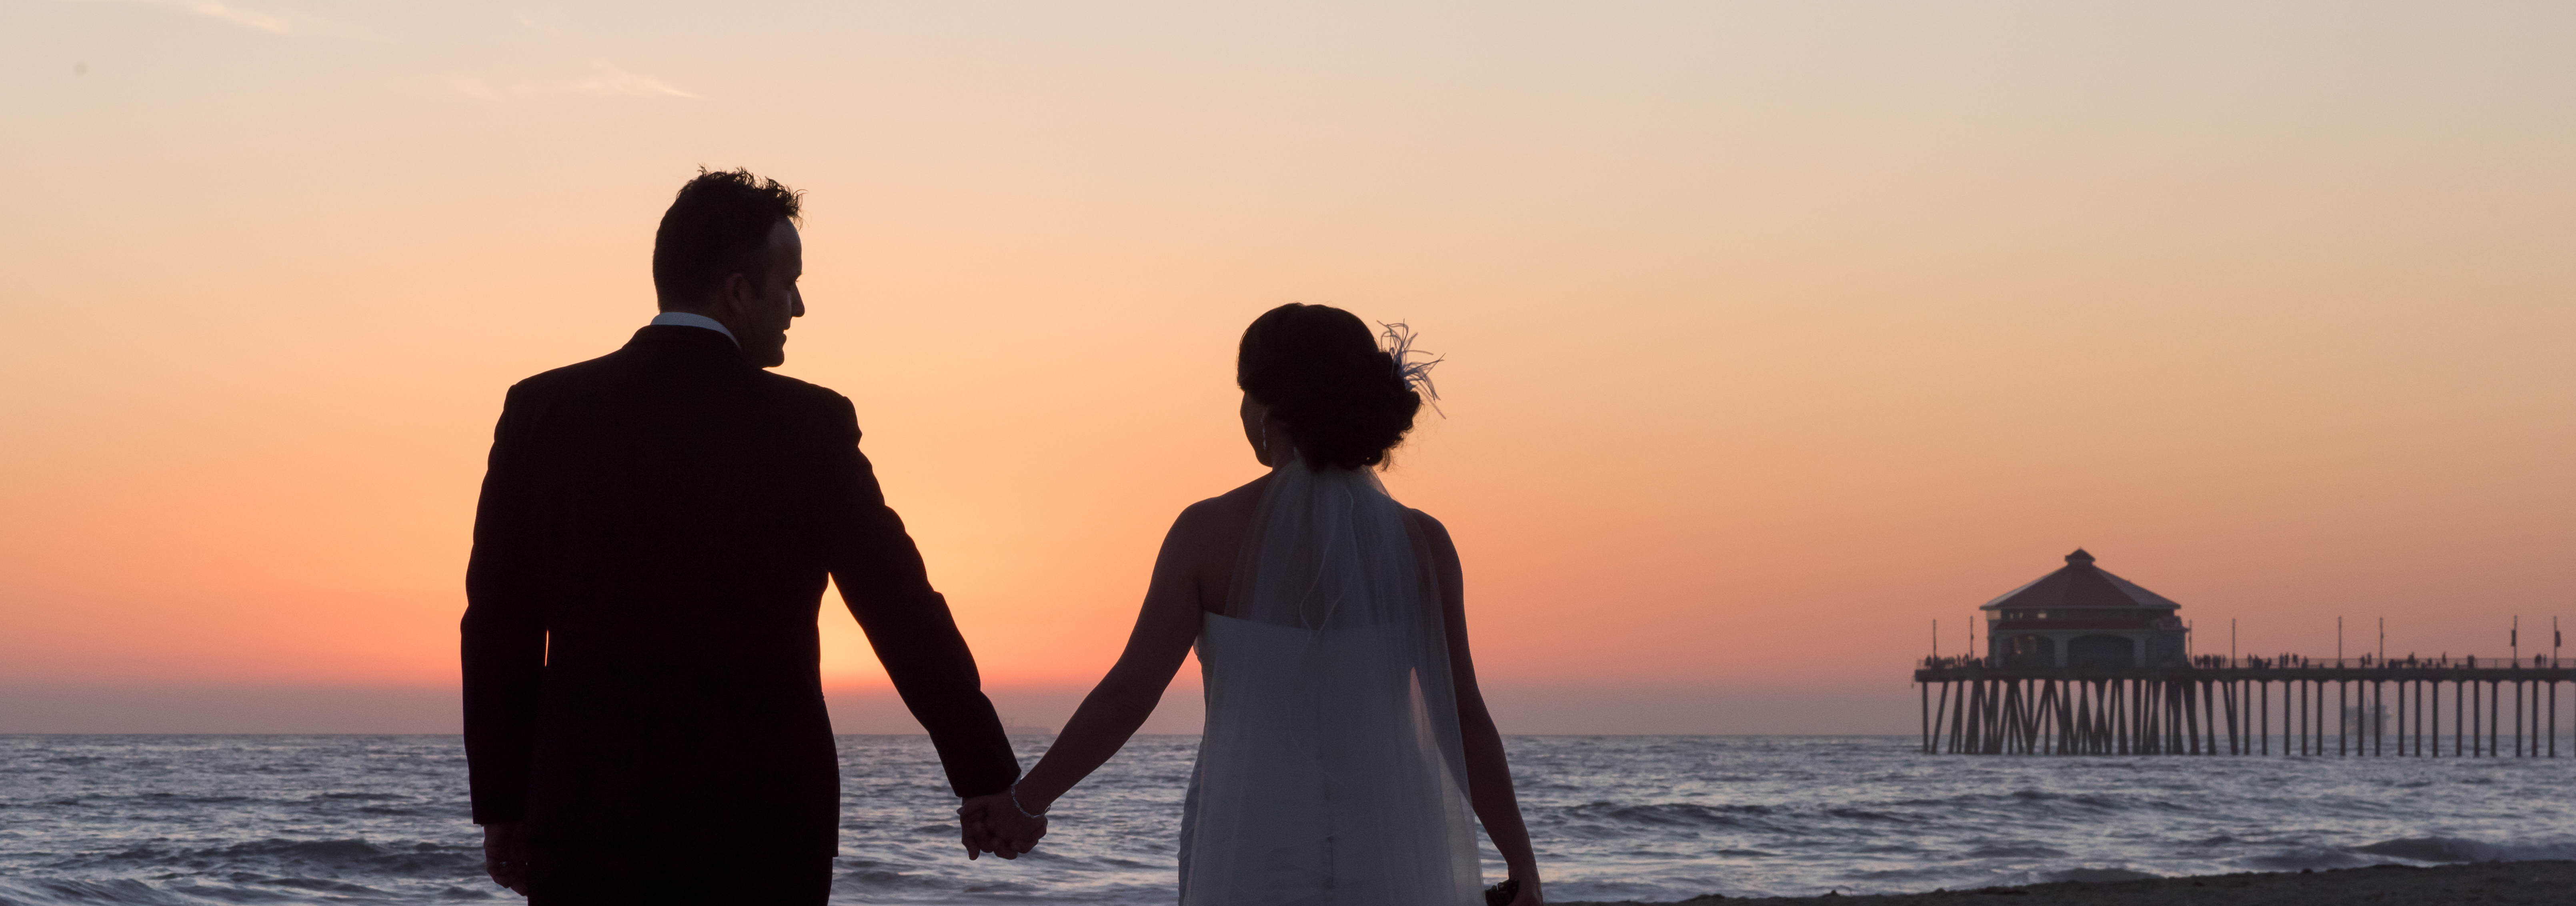 Wedding couple at sunset holding hands in Orange County